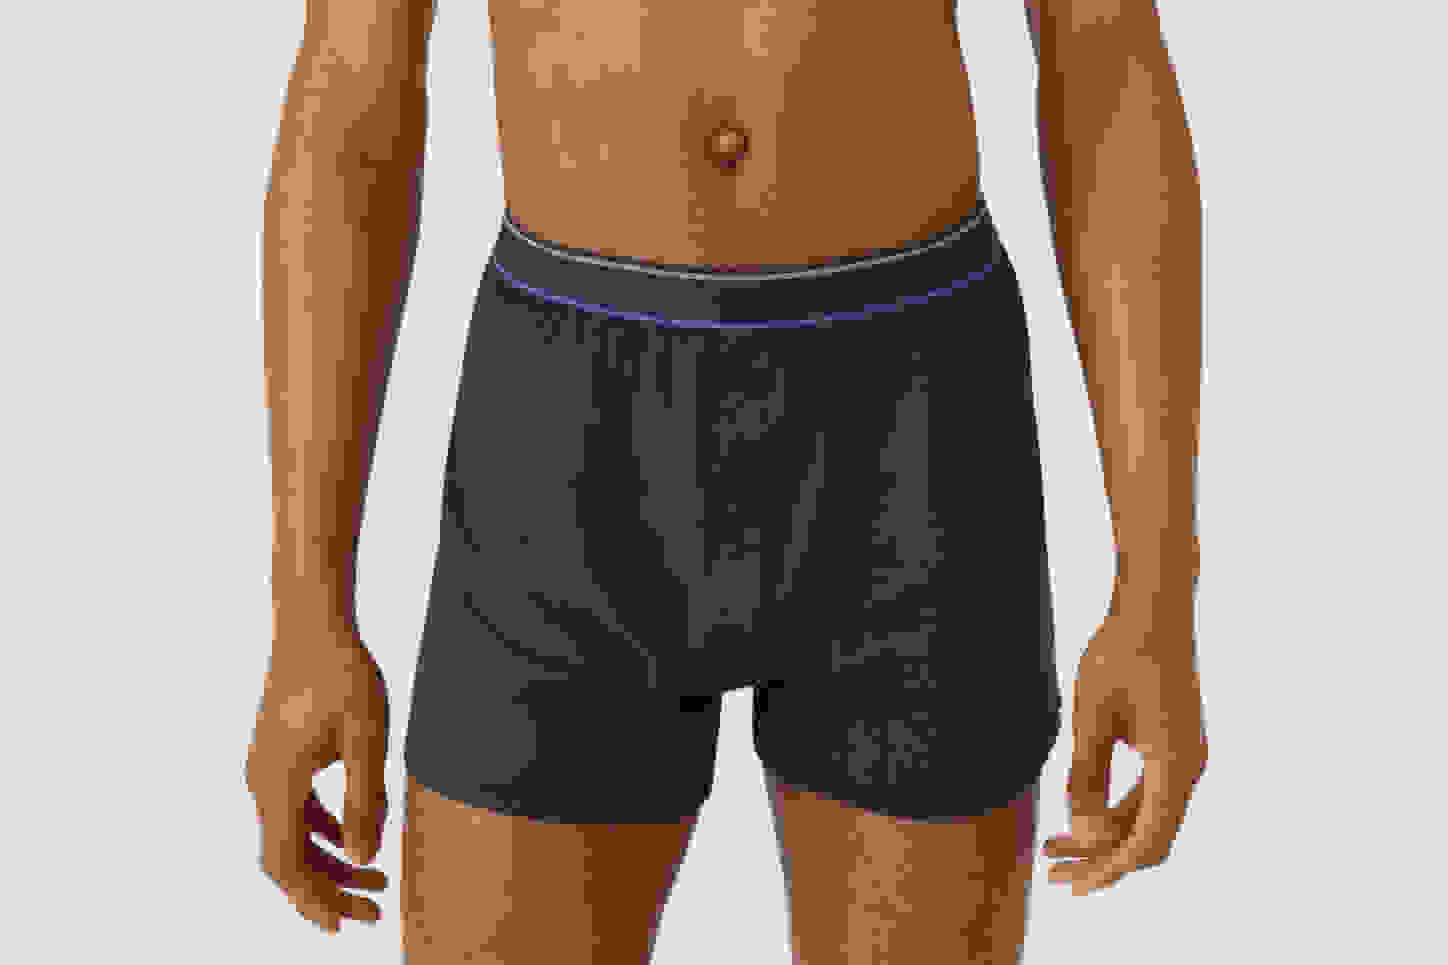 PUMP Underwear - Have you checked our new color combinations? Plus a  renewed FratBoy Boxer. Now Available at wearpump.com